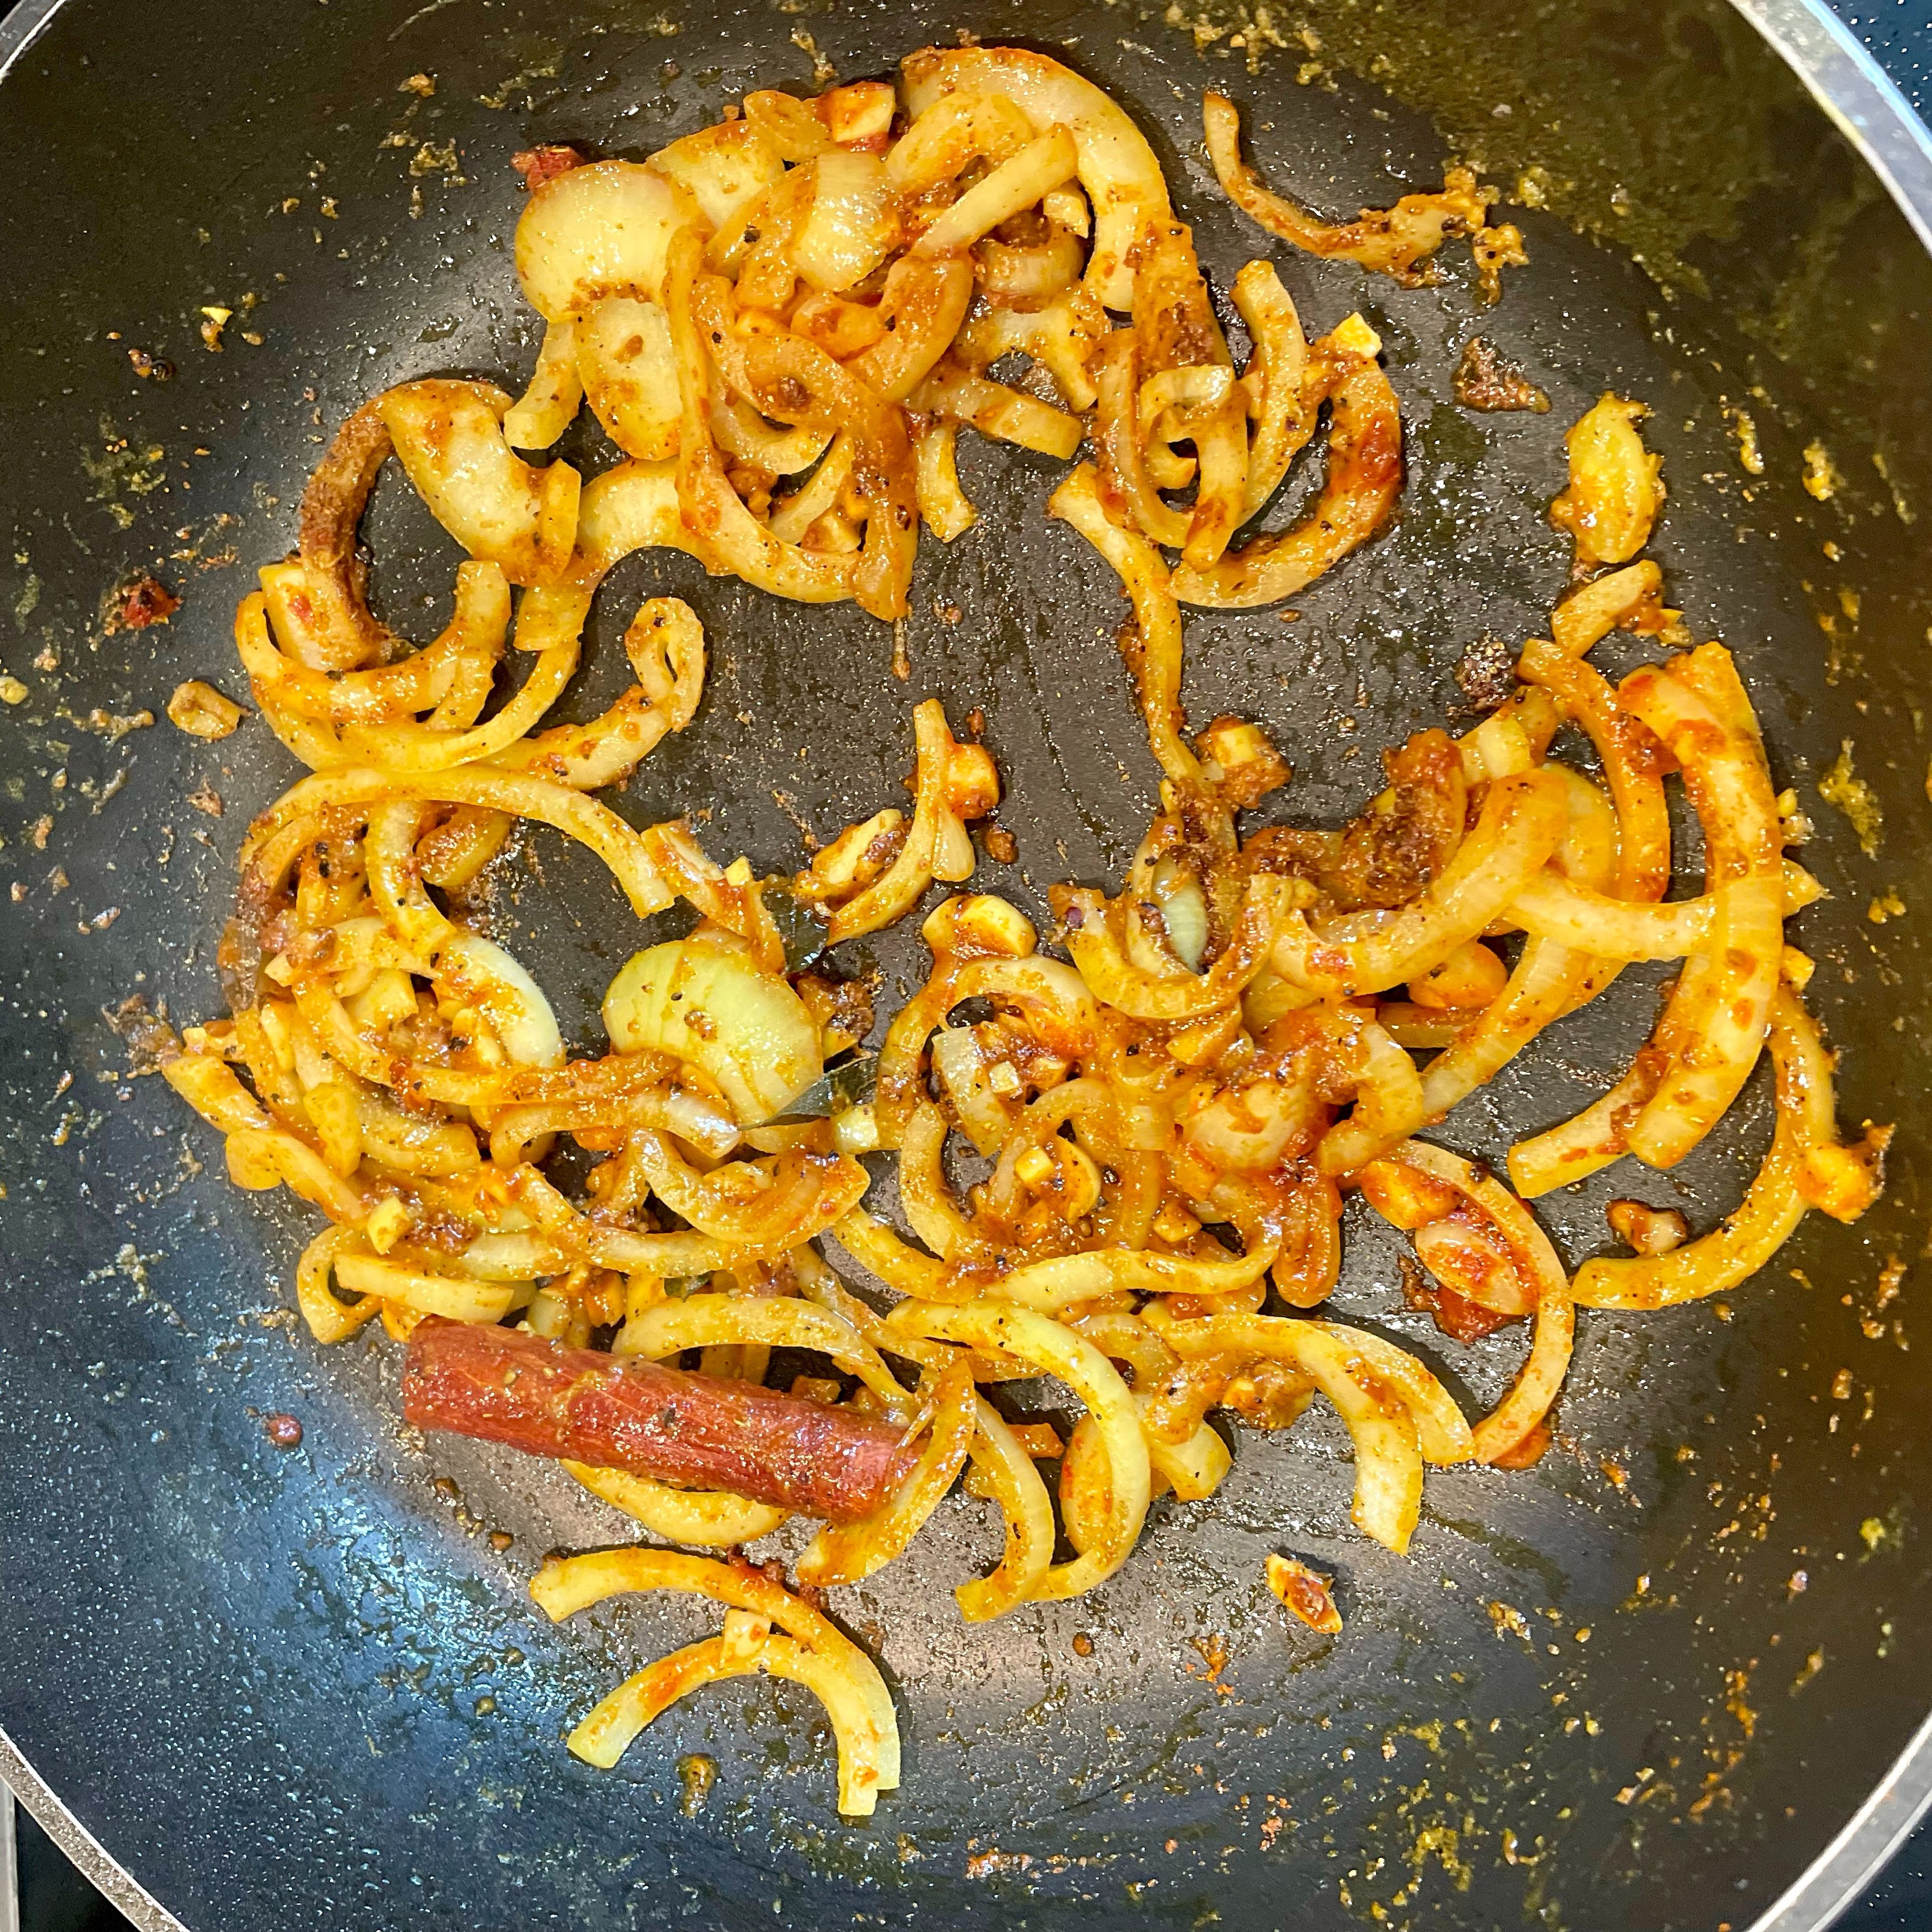 Fry onions, garlic, ginger, cinnamon and curry leaves till onions start to brown. Add salt, unroasted curry powder and cayenne pepper.